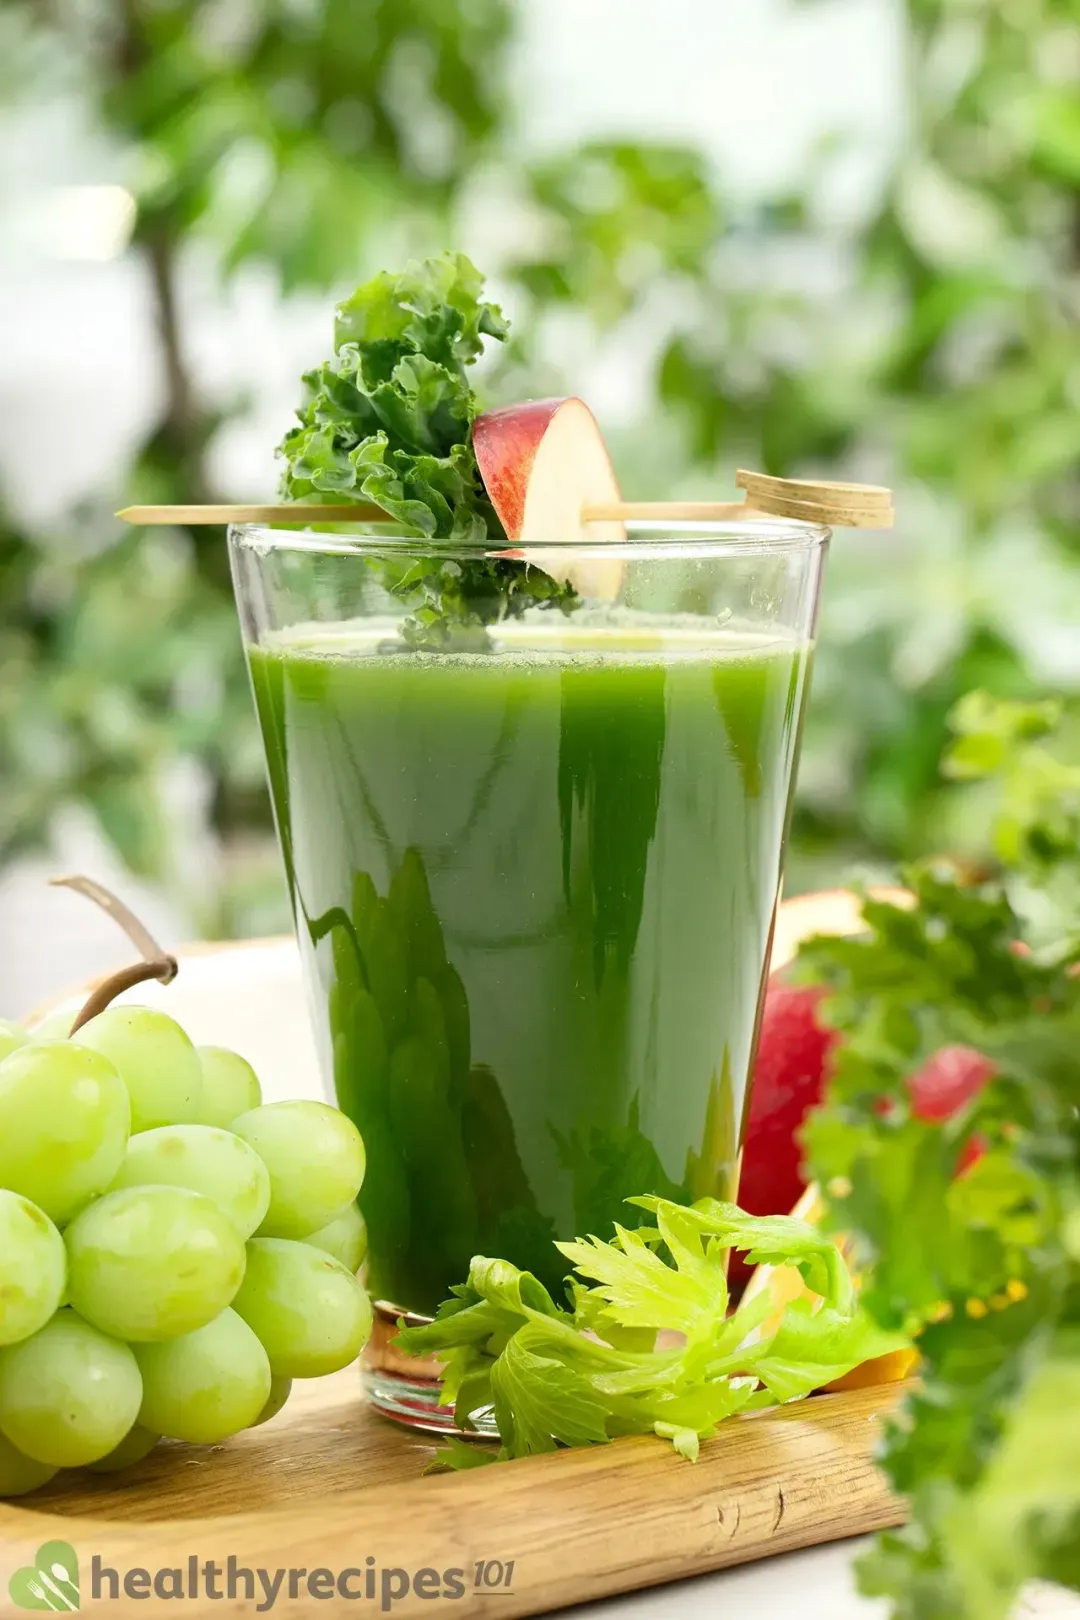 Green Machine Juice Recipe - Drink Your Daily Dose of Vegetables